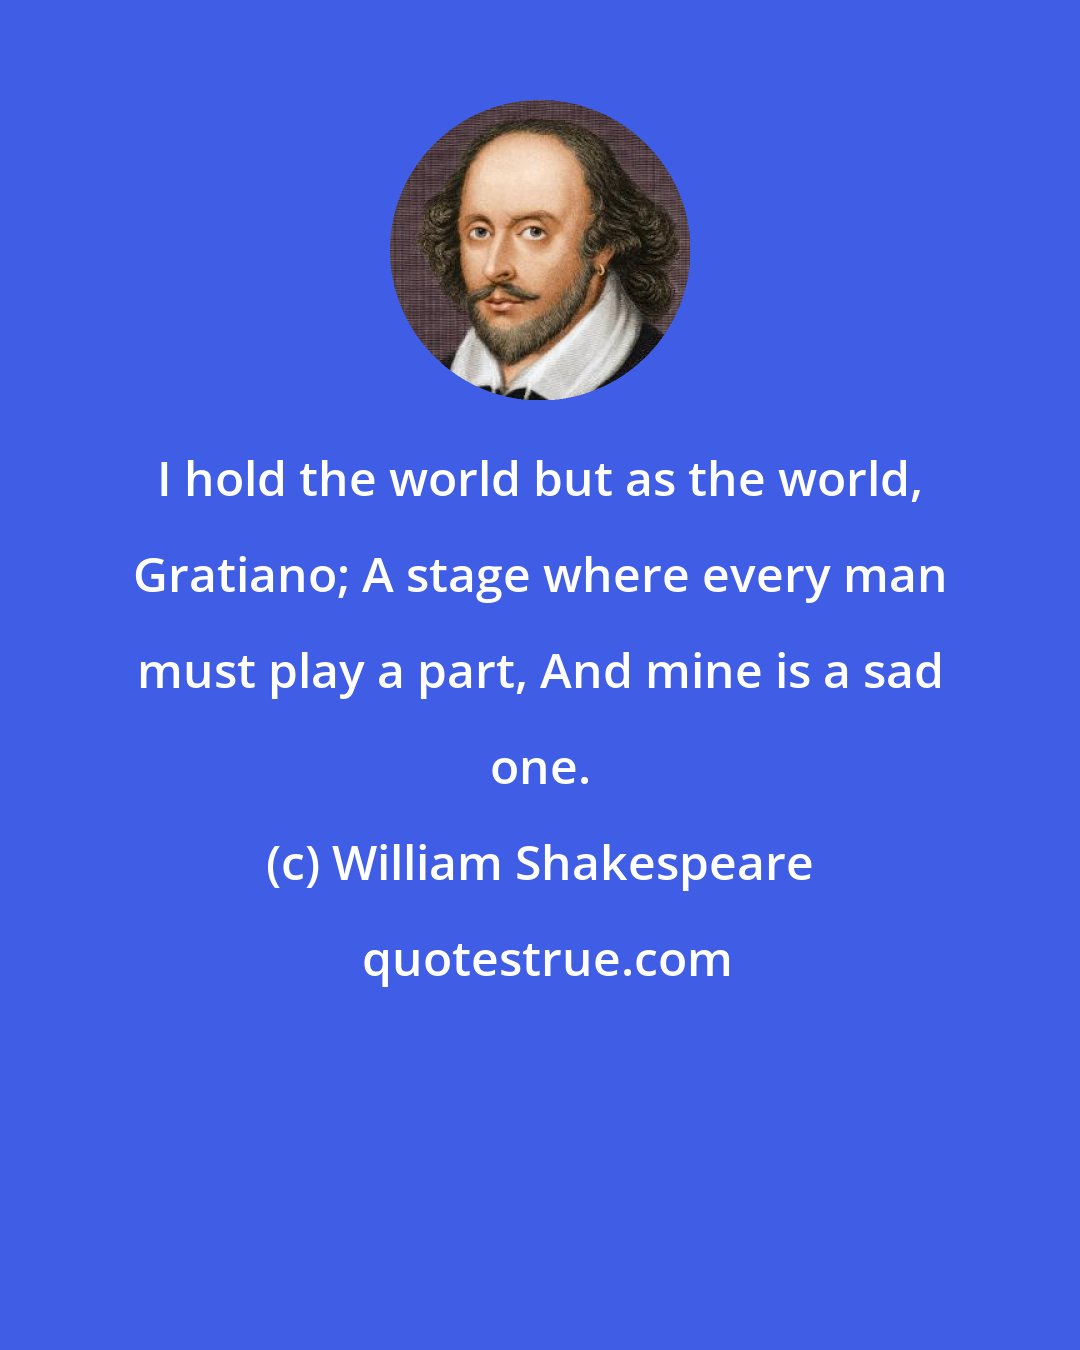 William Shakespeare: I hold the world but as the world, Gratiano; A stage where every man must play a part, And mine is a sad one.